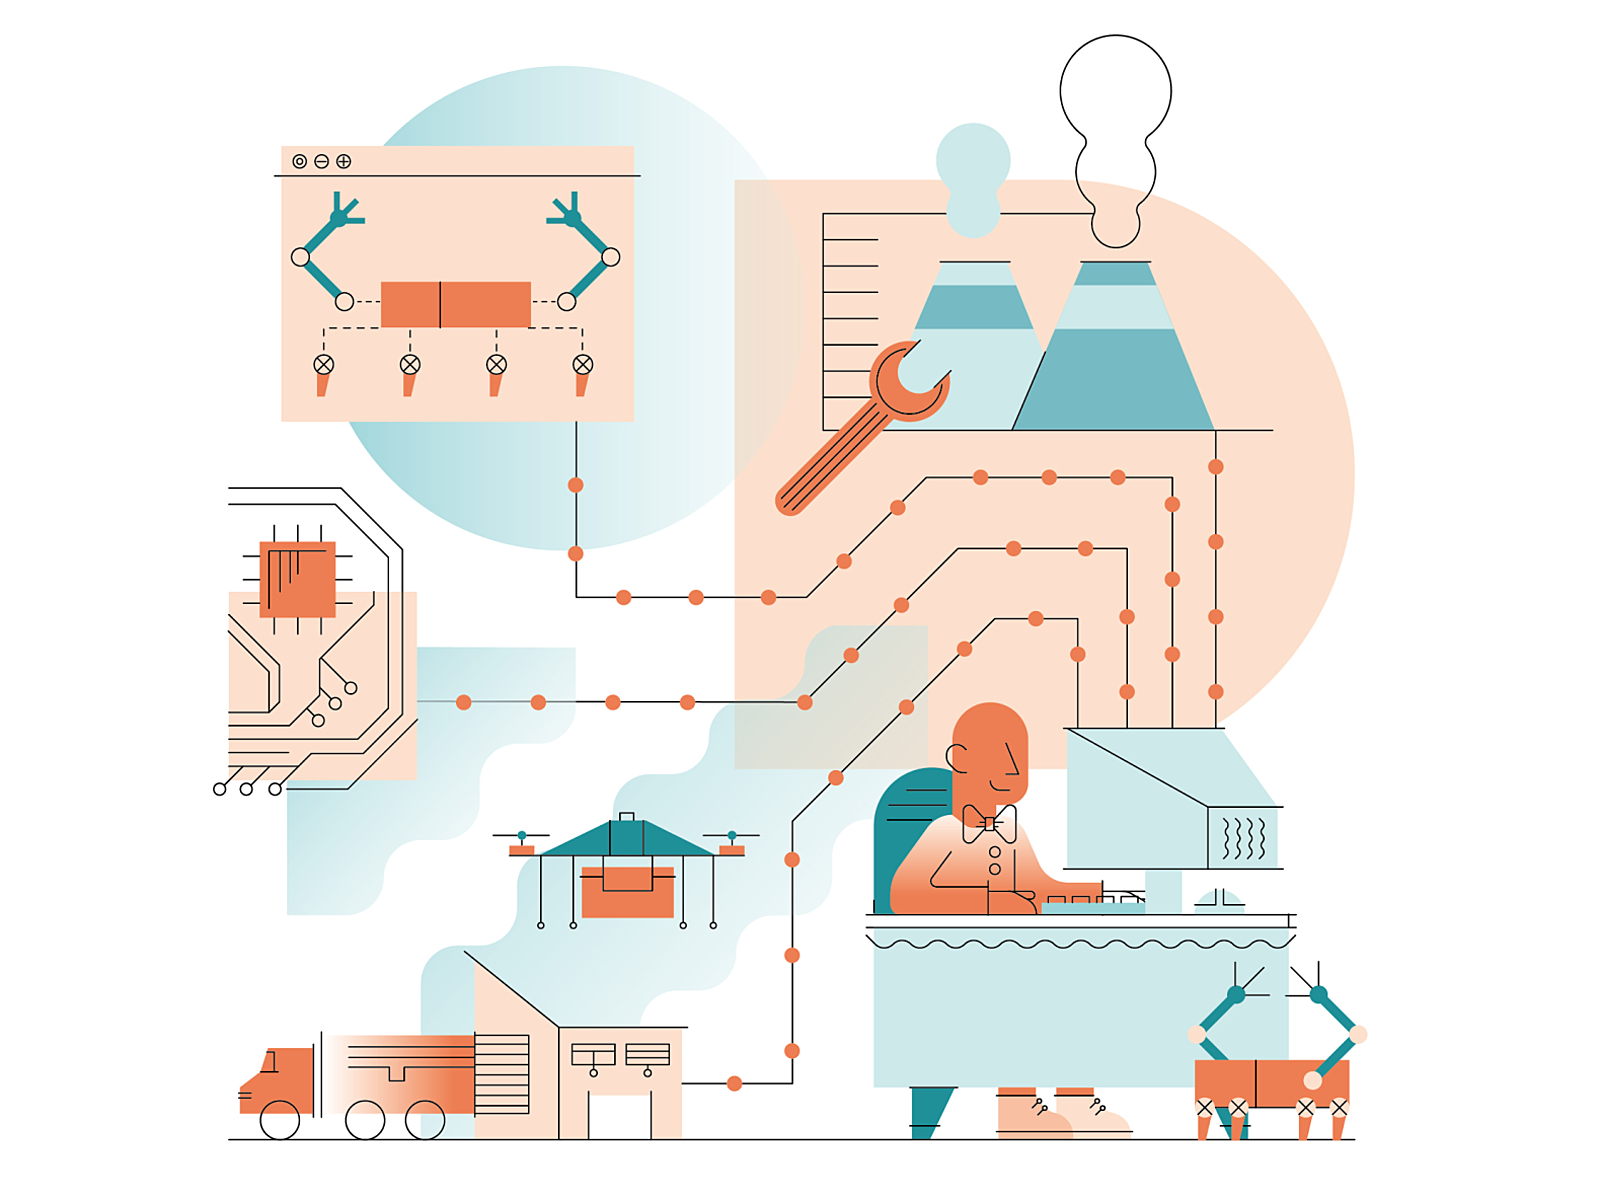 Future of Outsourcing illustration by Elisabetta Calabritto on Dribbble